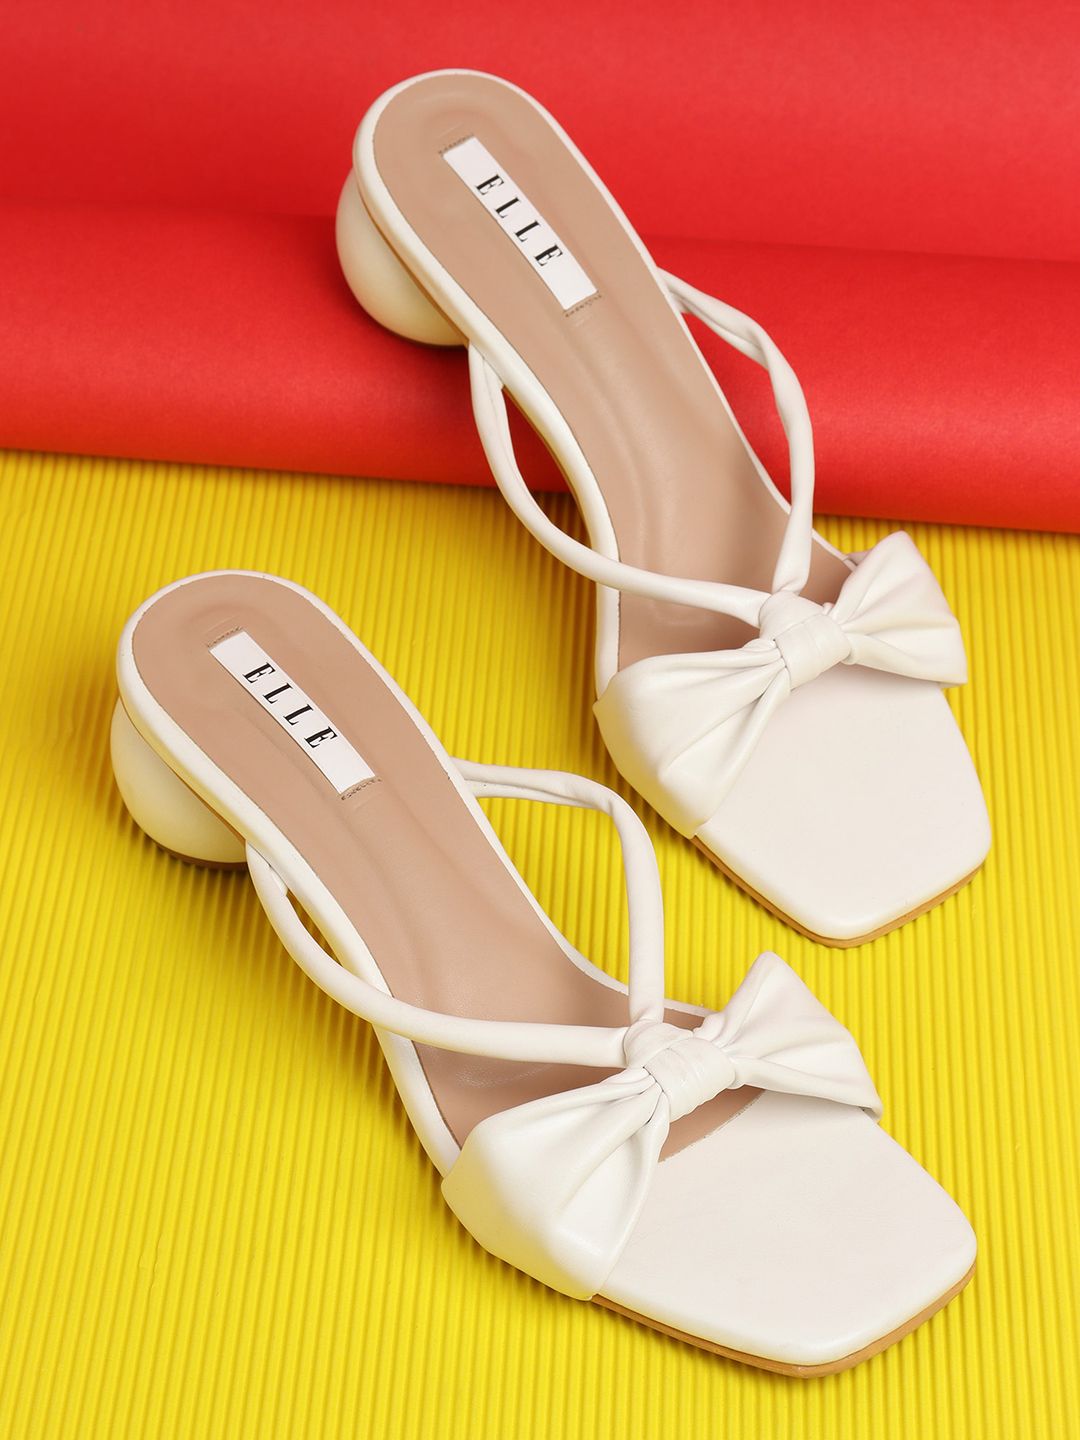 ELLE White Block Sandals with Bows Price in India